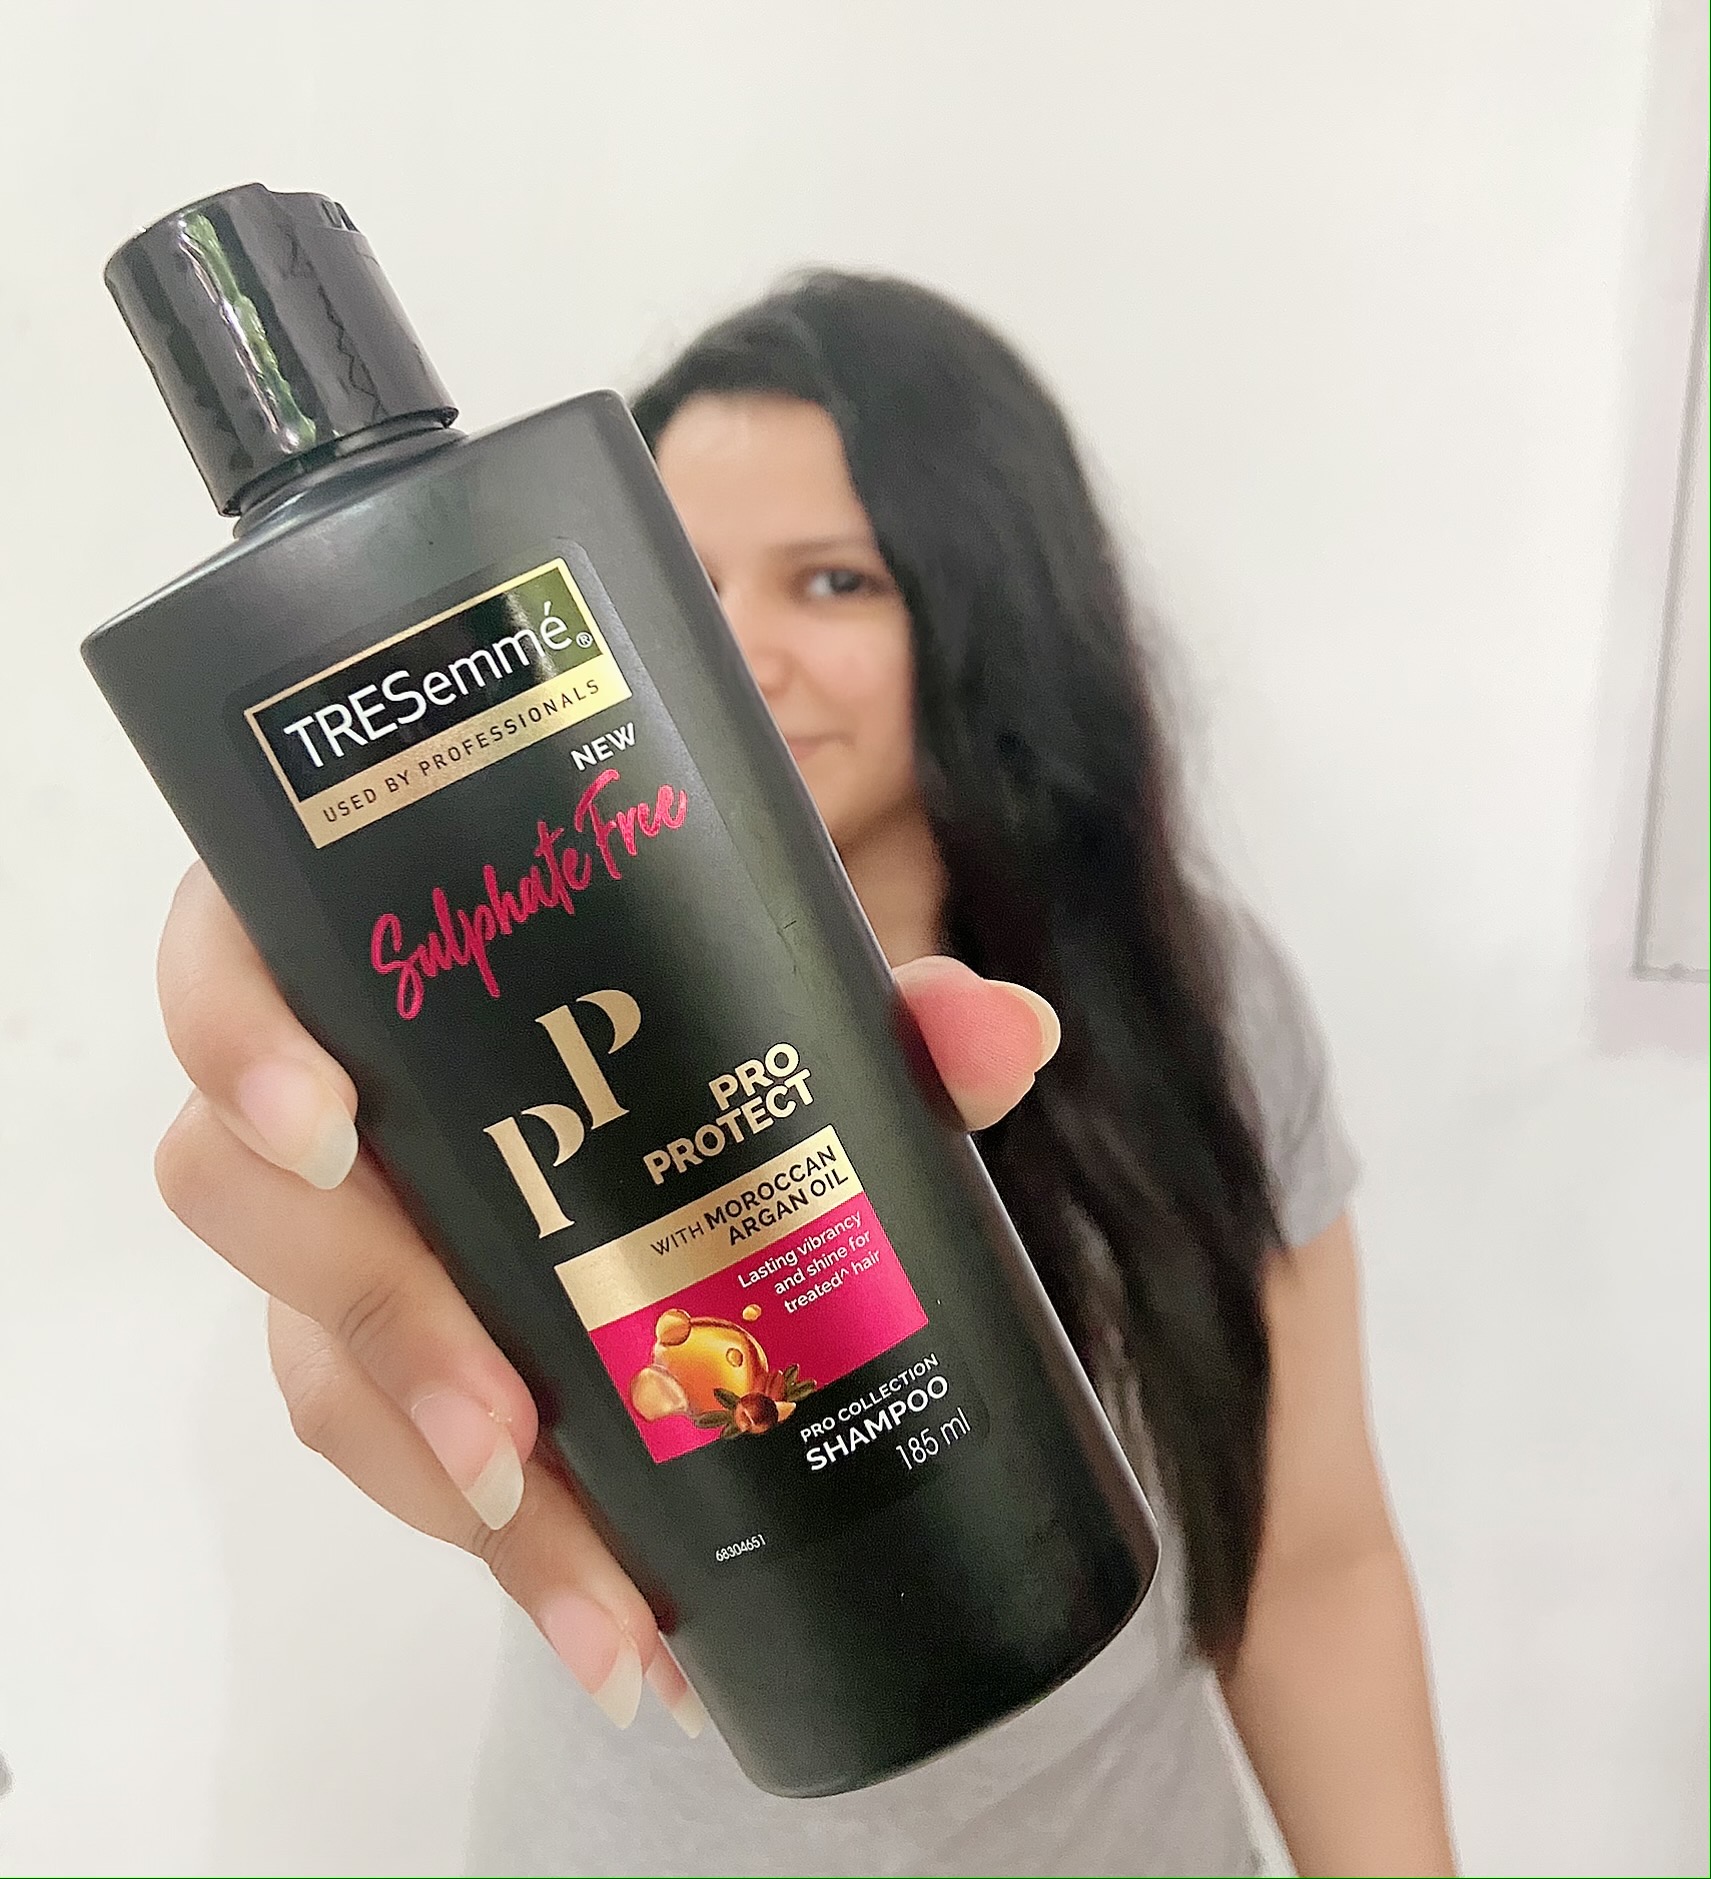 Tresemme Pro Protect Sulphate Free Shampoo Genuine Reviews From Users